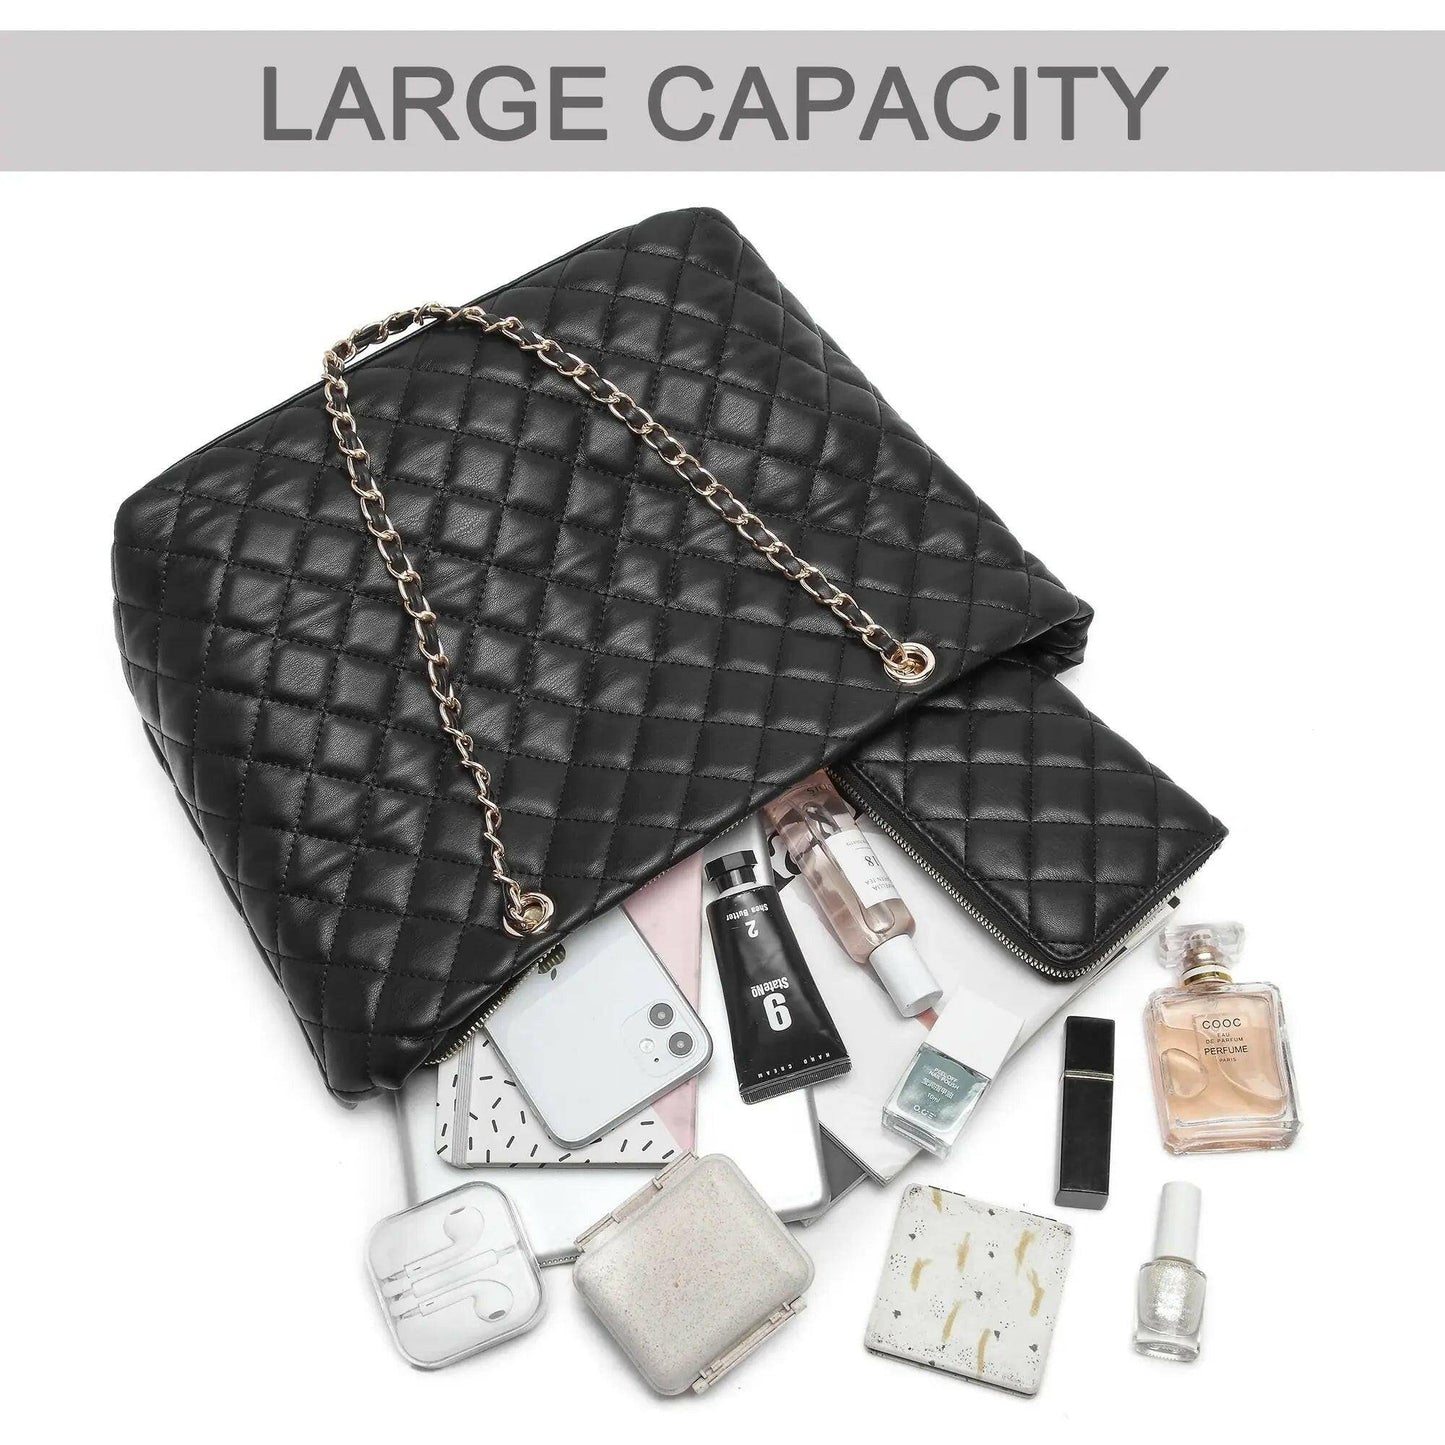 Poppy Quilted Women Handbags Purses Leather Tote Bag Satchel Wallet Set 2Pcs Chain Strap Shoulder Bag Classic - Comfortably chic